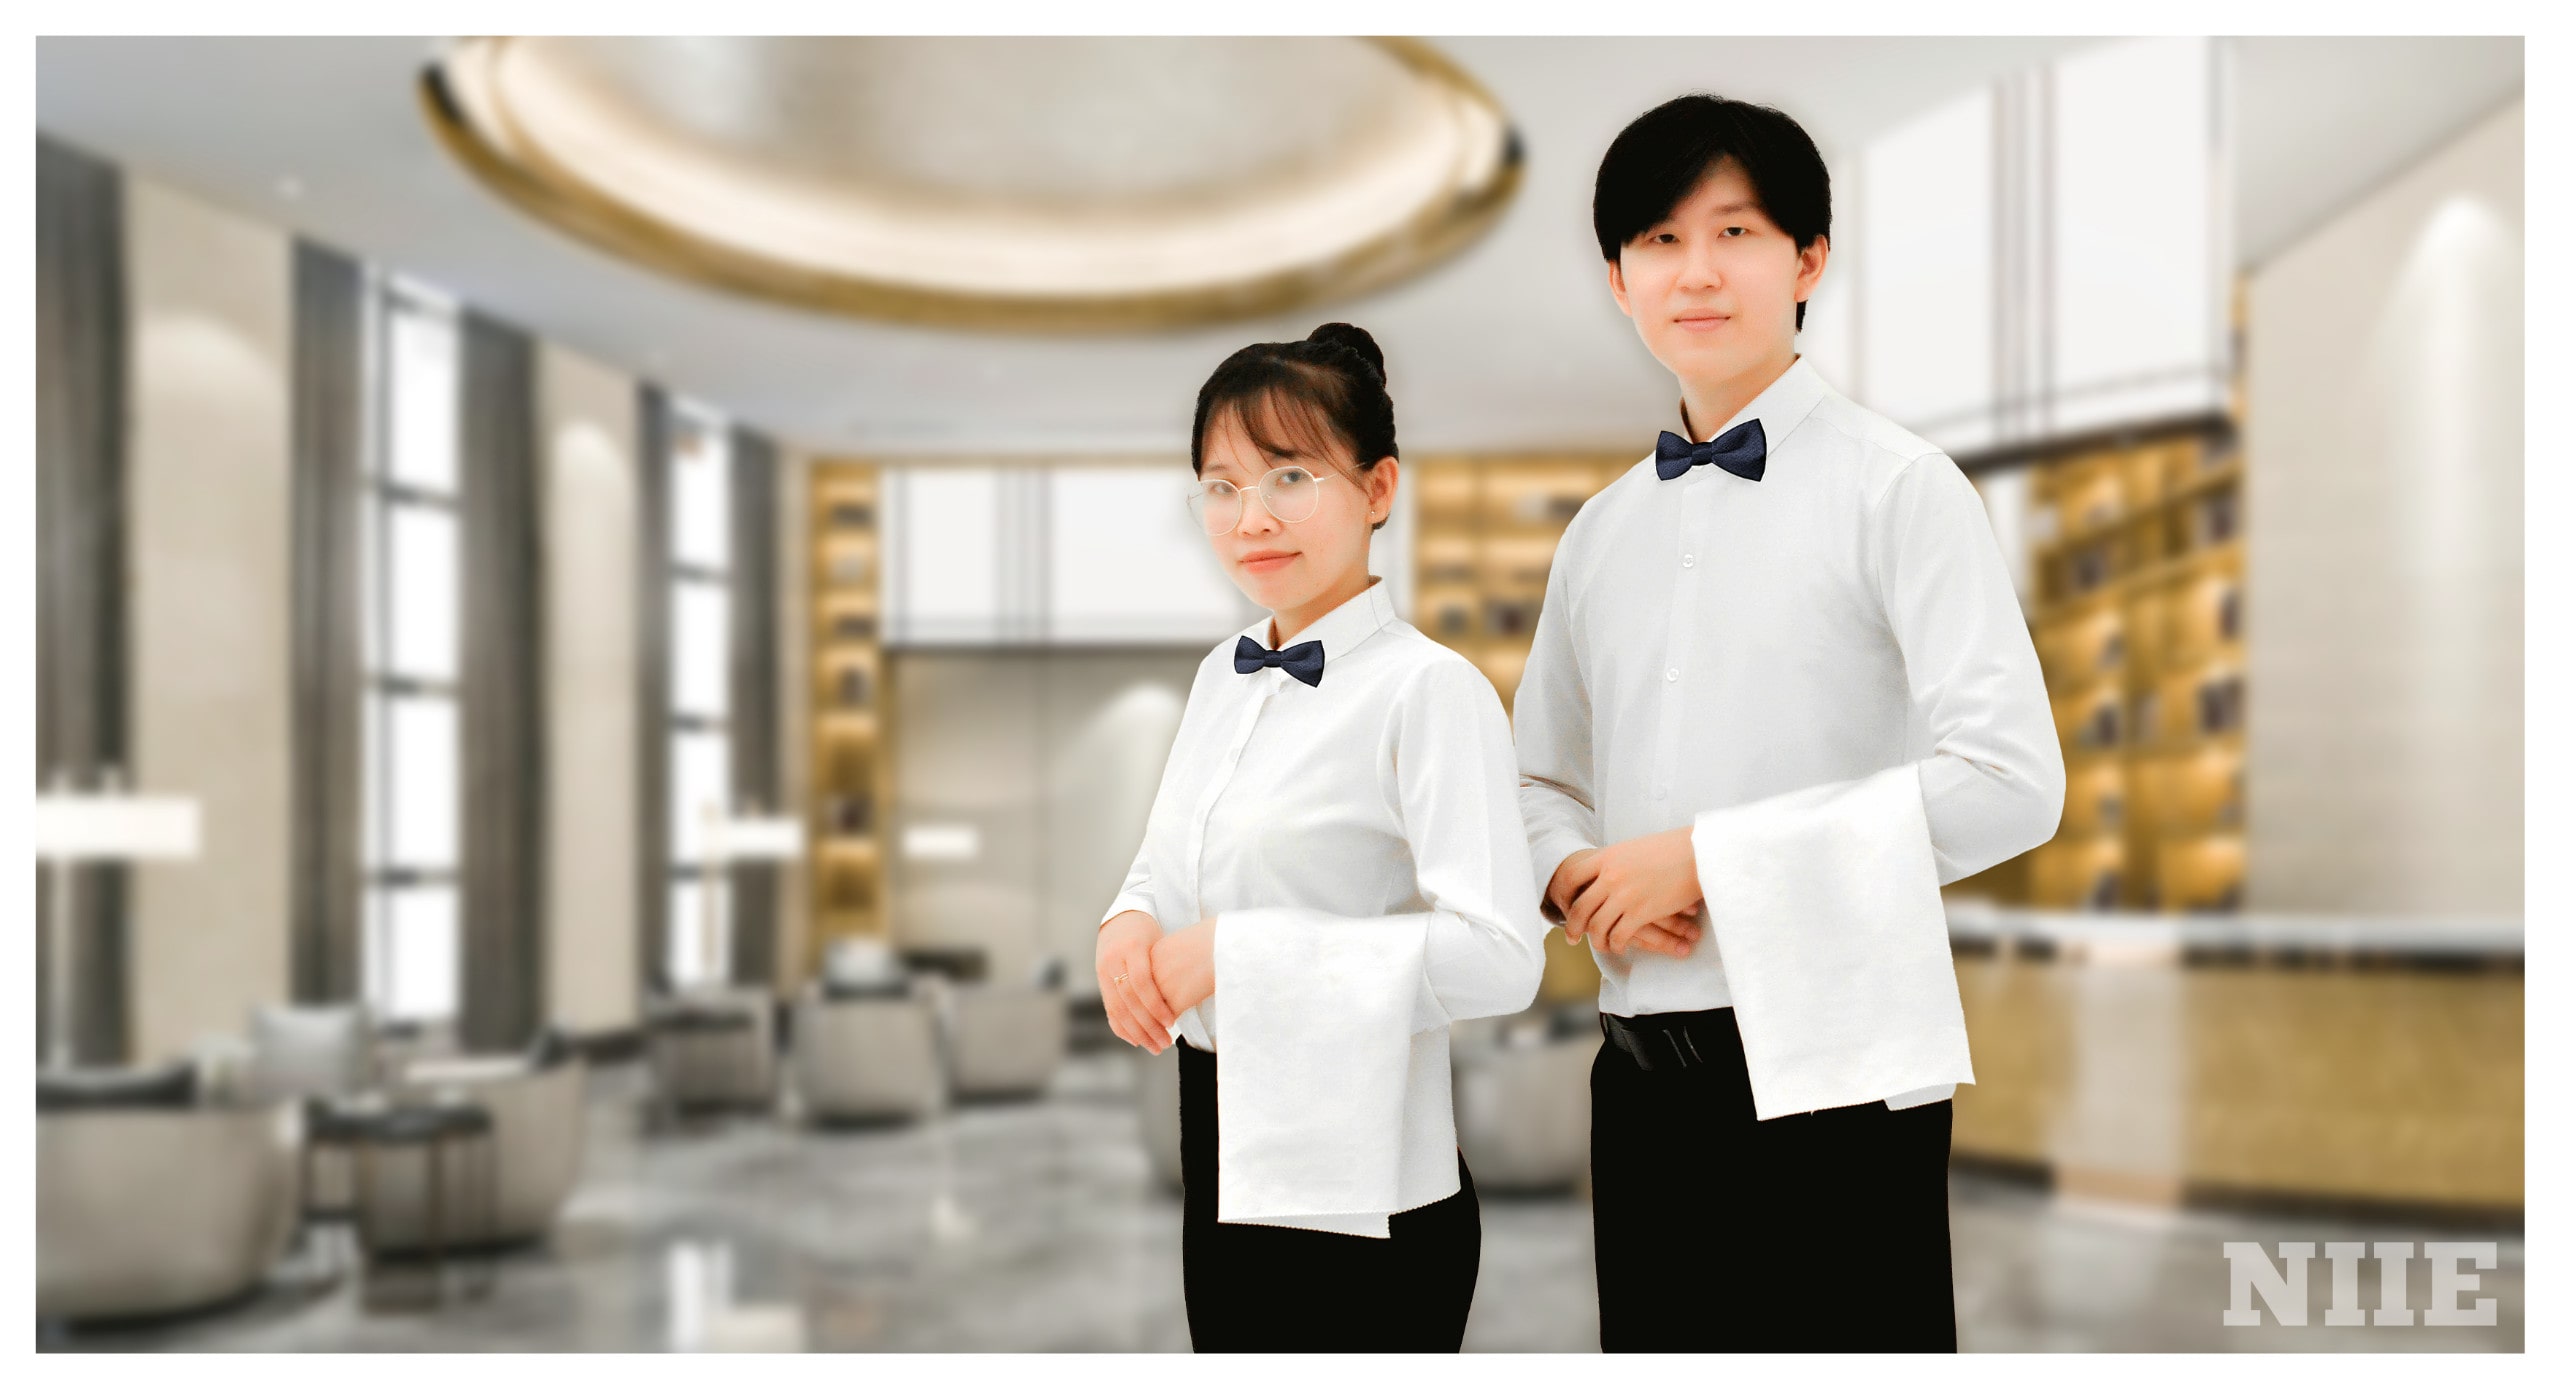 In the coming years, students in Hospitality Management will be valuable assets. Let's explore the reasons through this article.